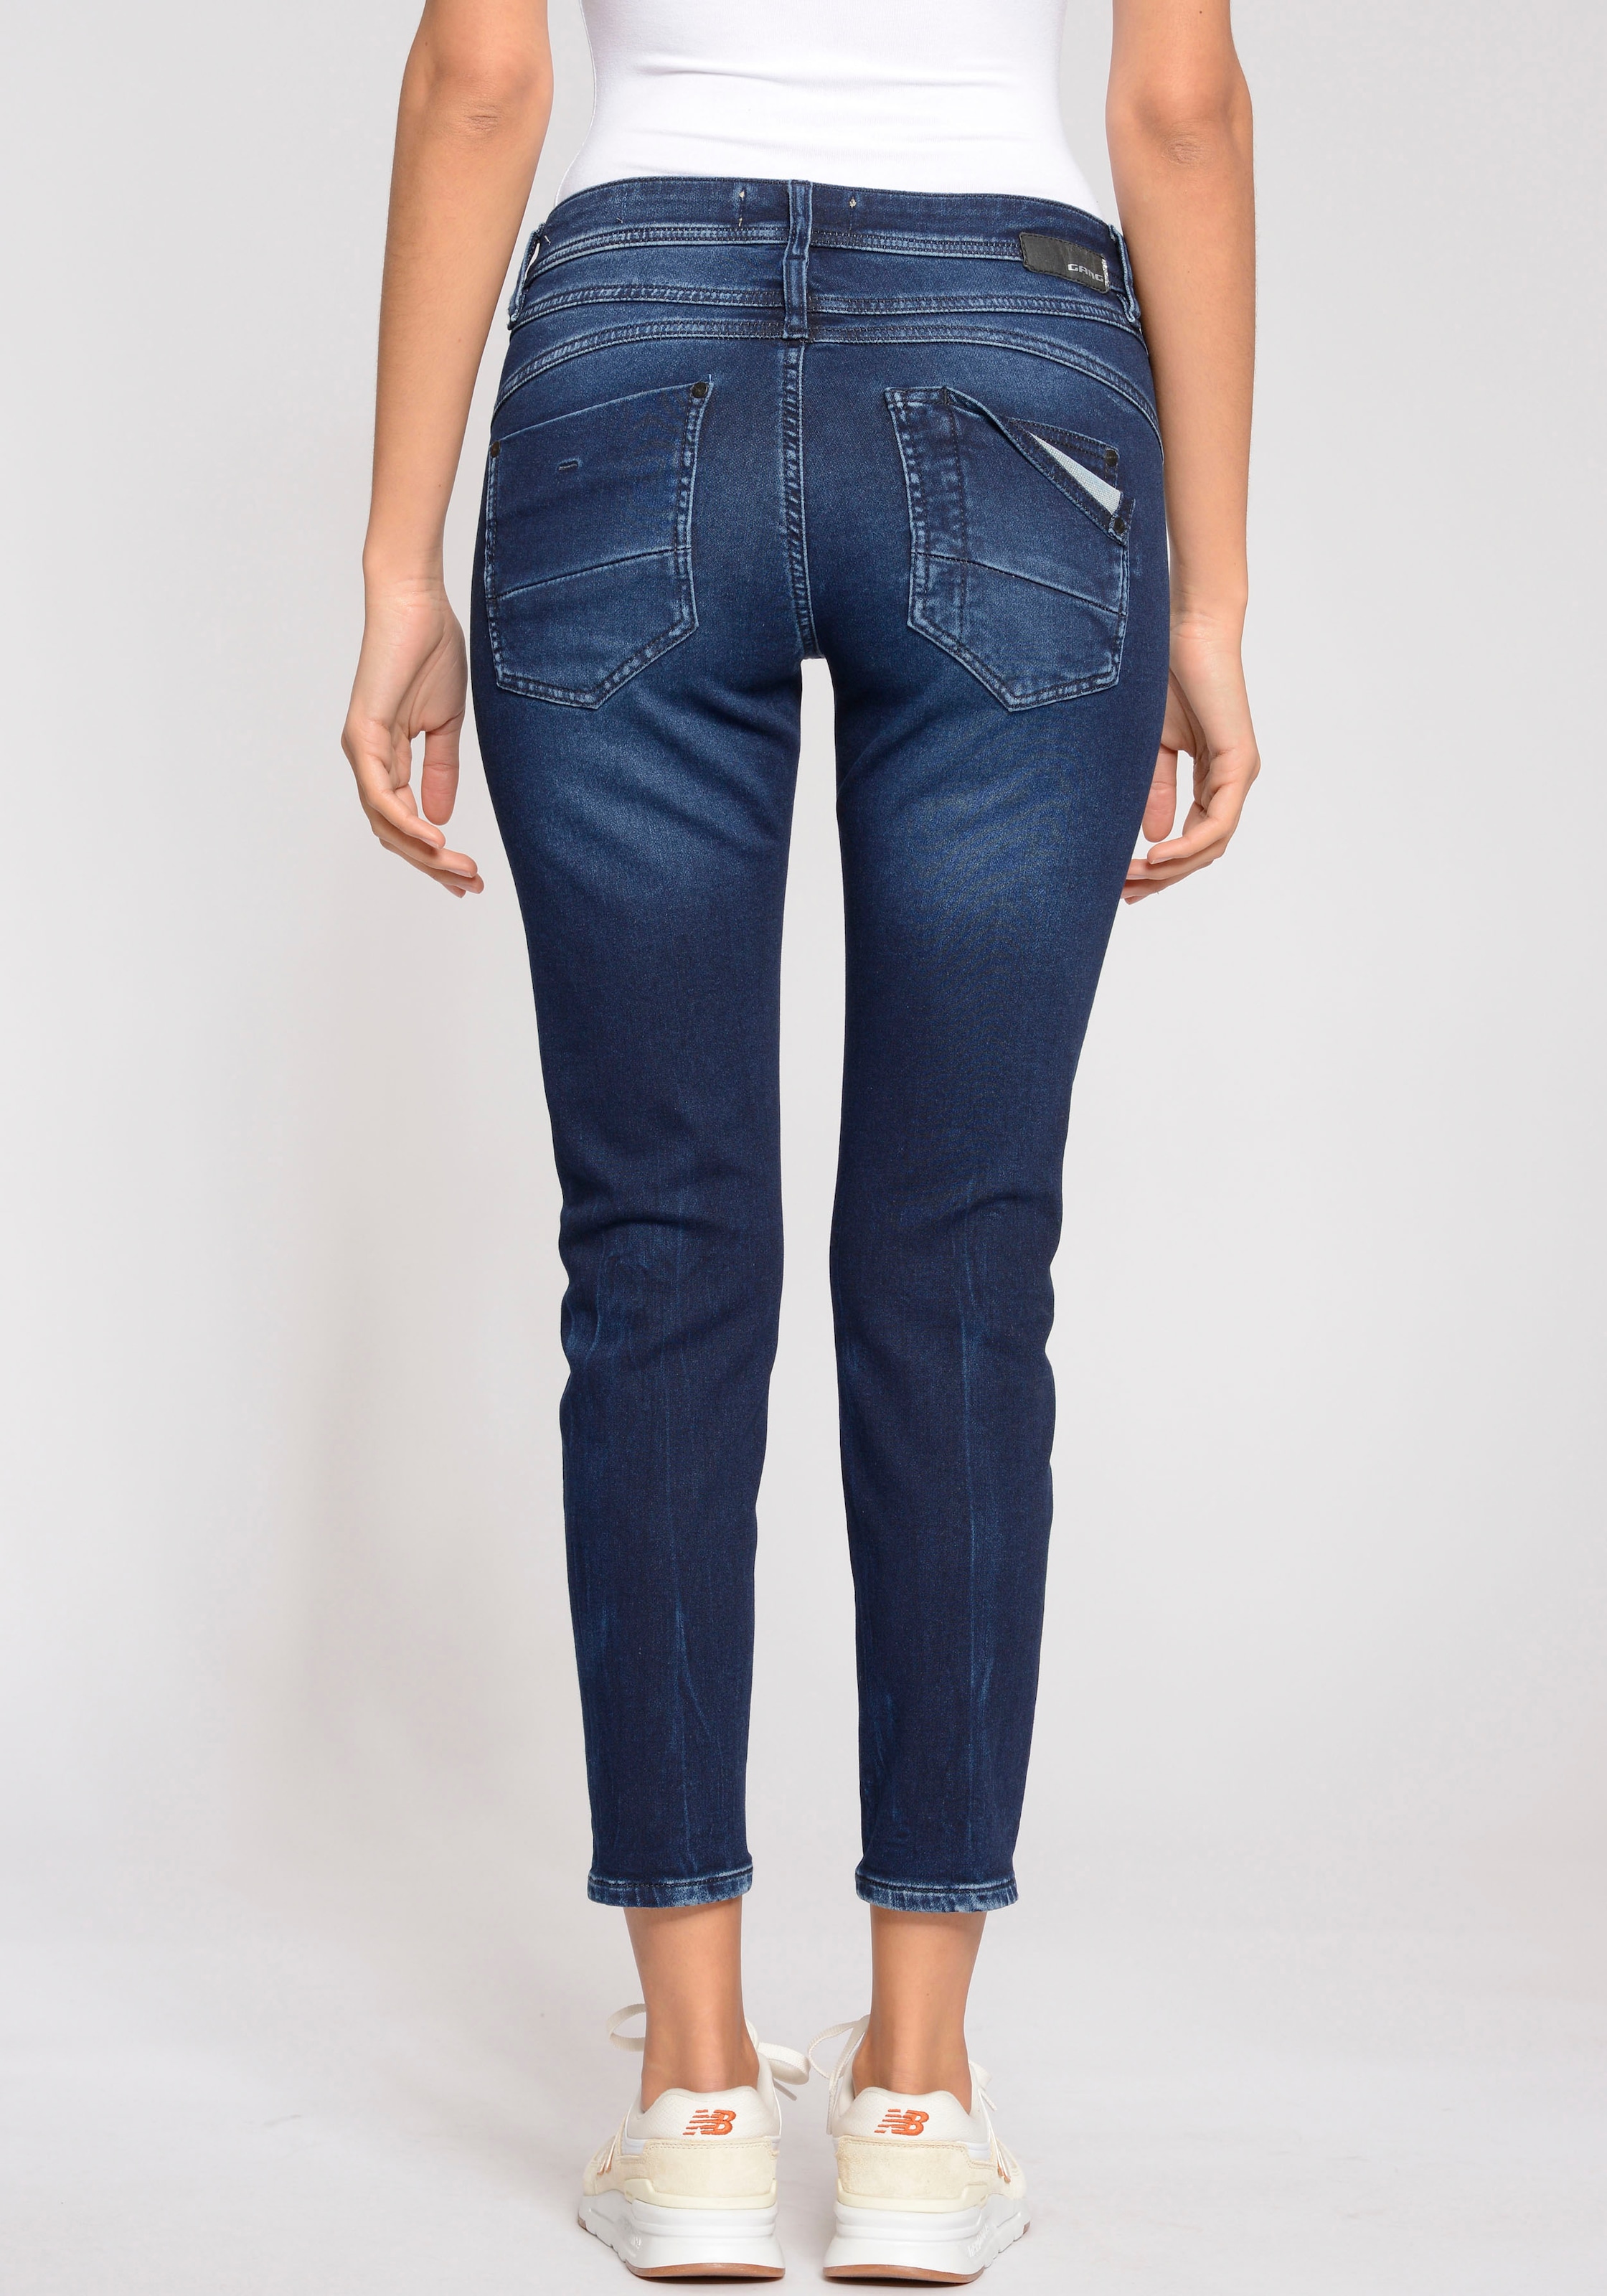 GANG Relax-fit-Jeans »94Amelie Cropped« kaufen bei OTTO